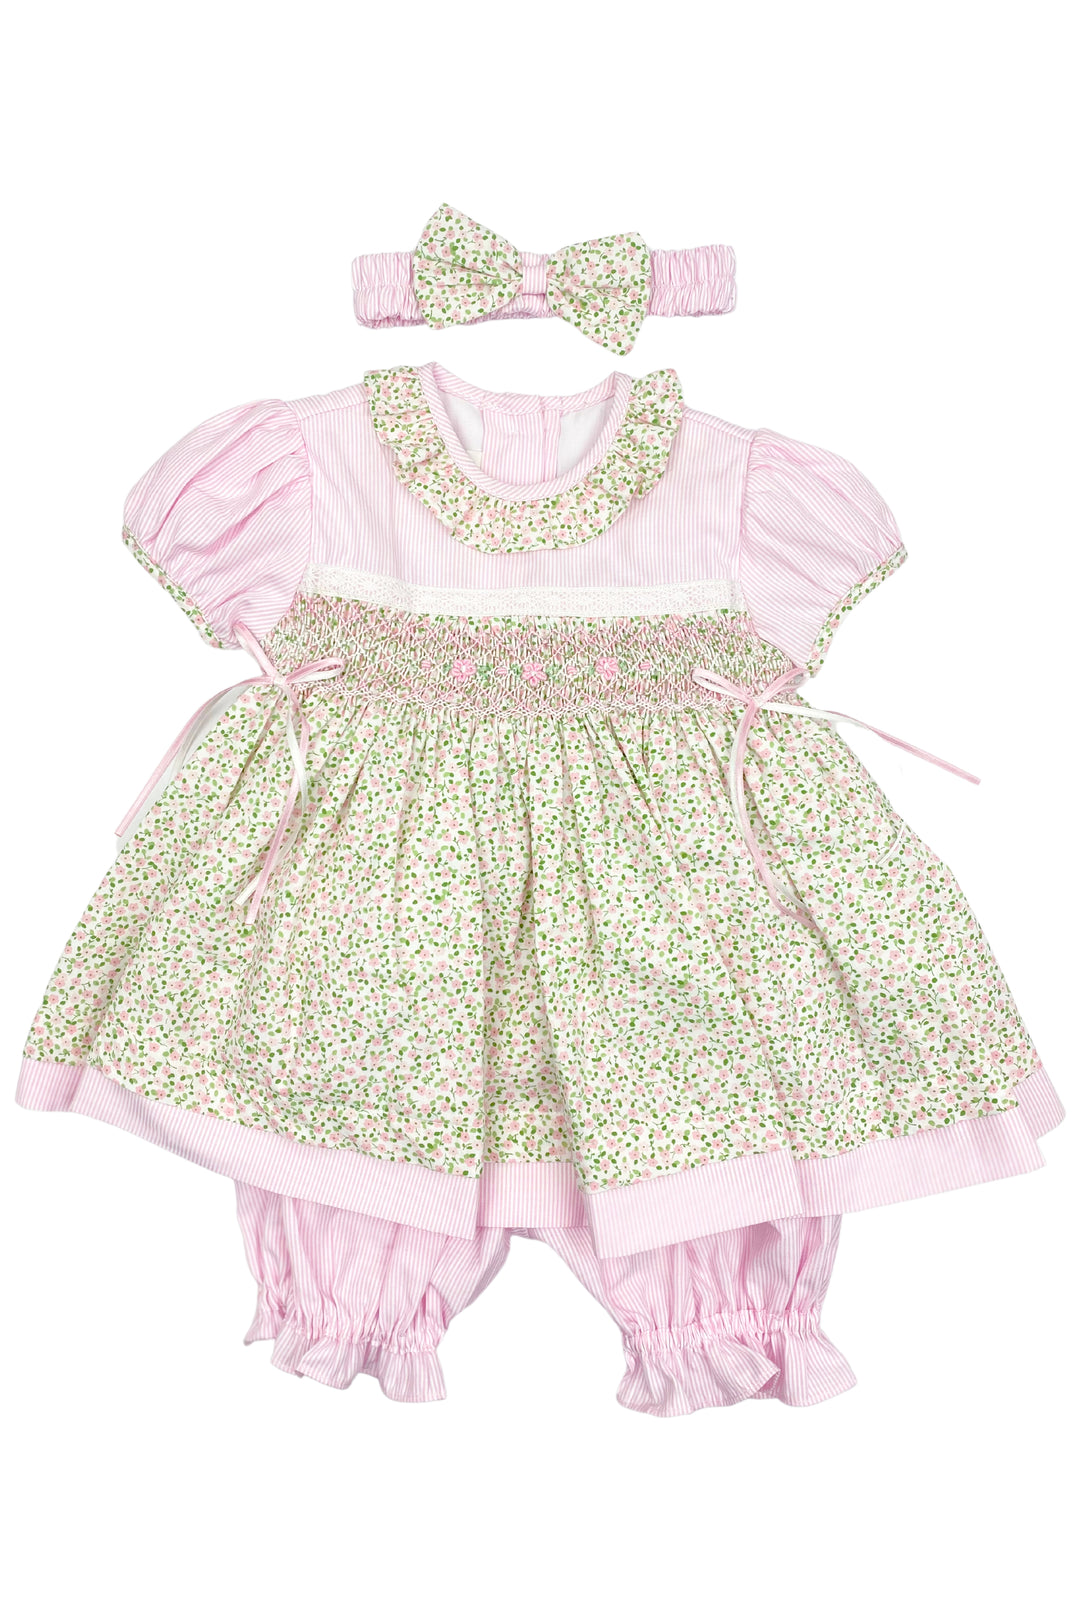 Pretty Originals "Lydia" Pink Floral Smocked Dress, Bloomers & Headband | iphoneandroidapplications